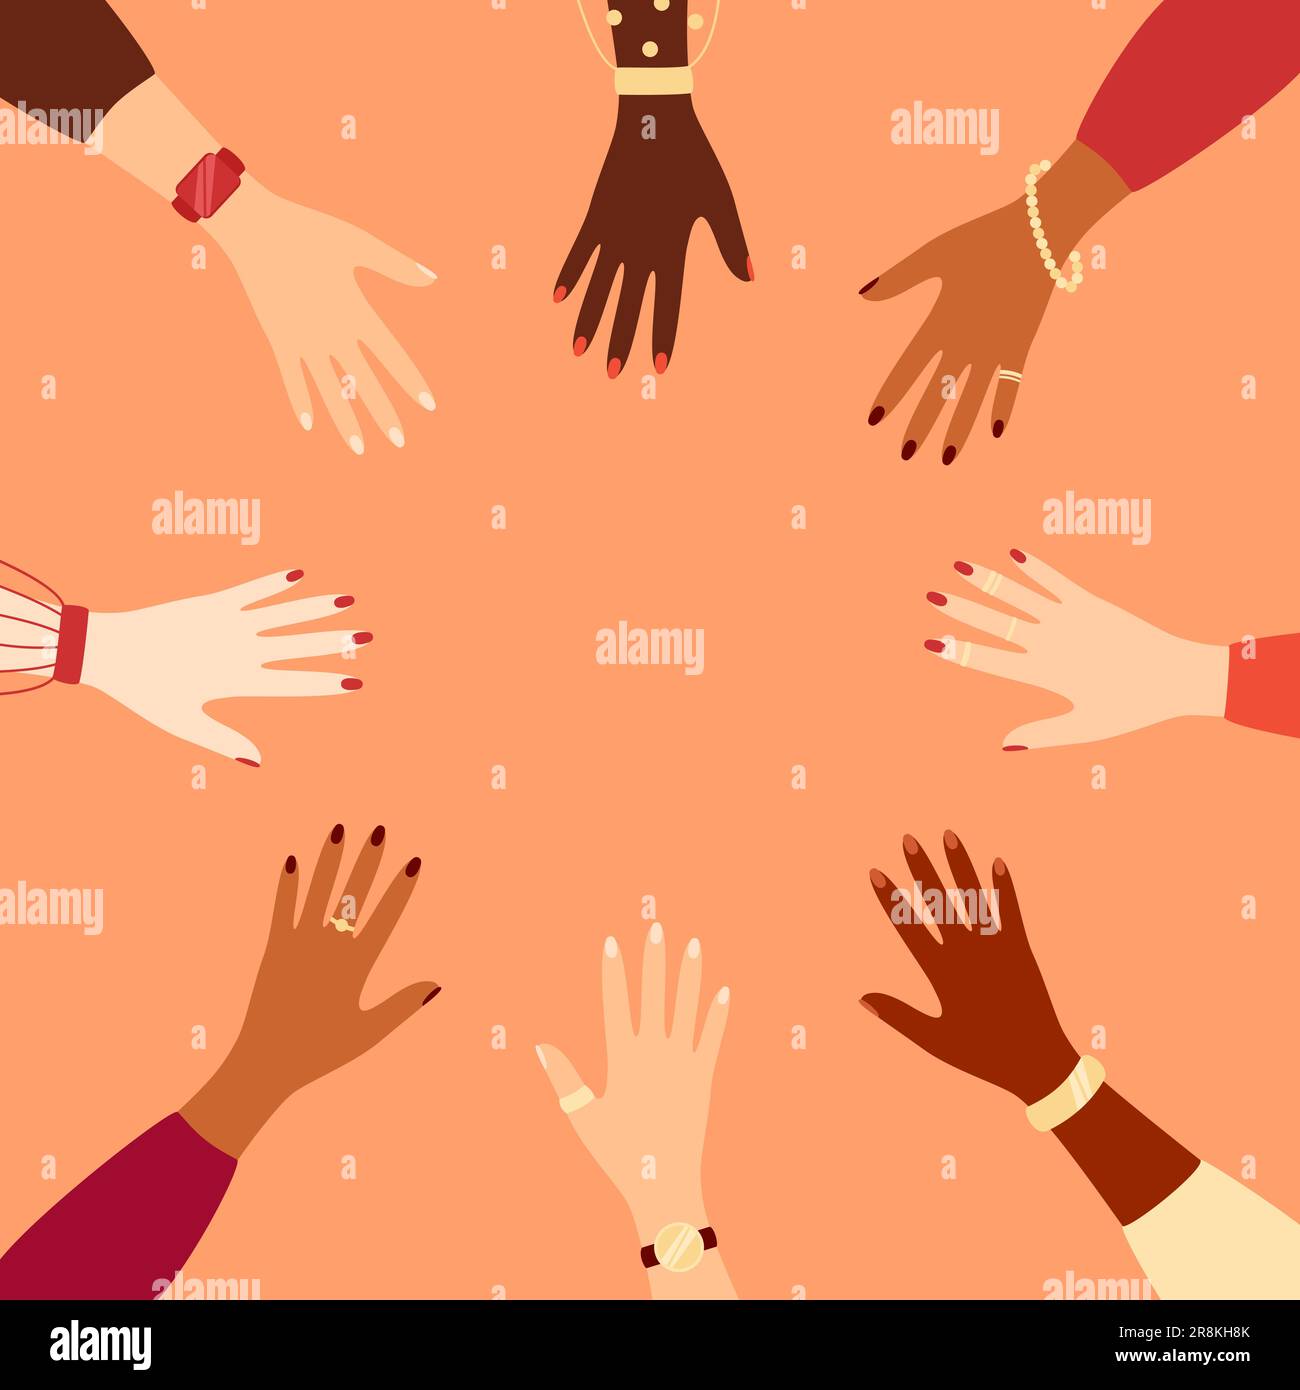 Outstretched hands of women of different ethnicities make a circle. Vector illustration in flat style Stock Vector